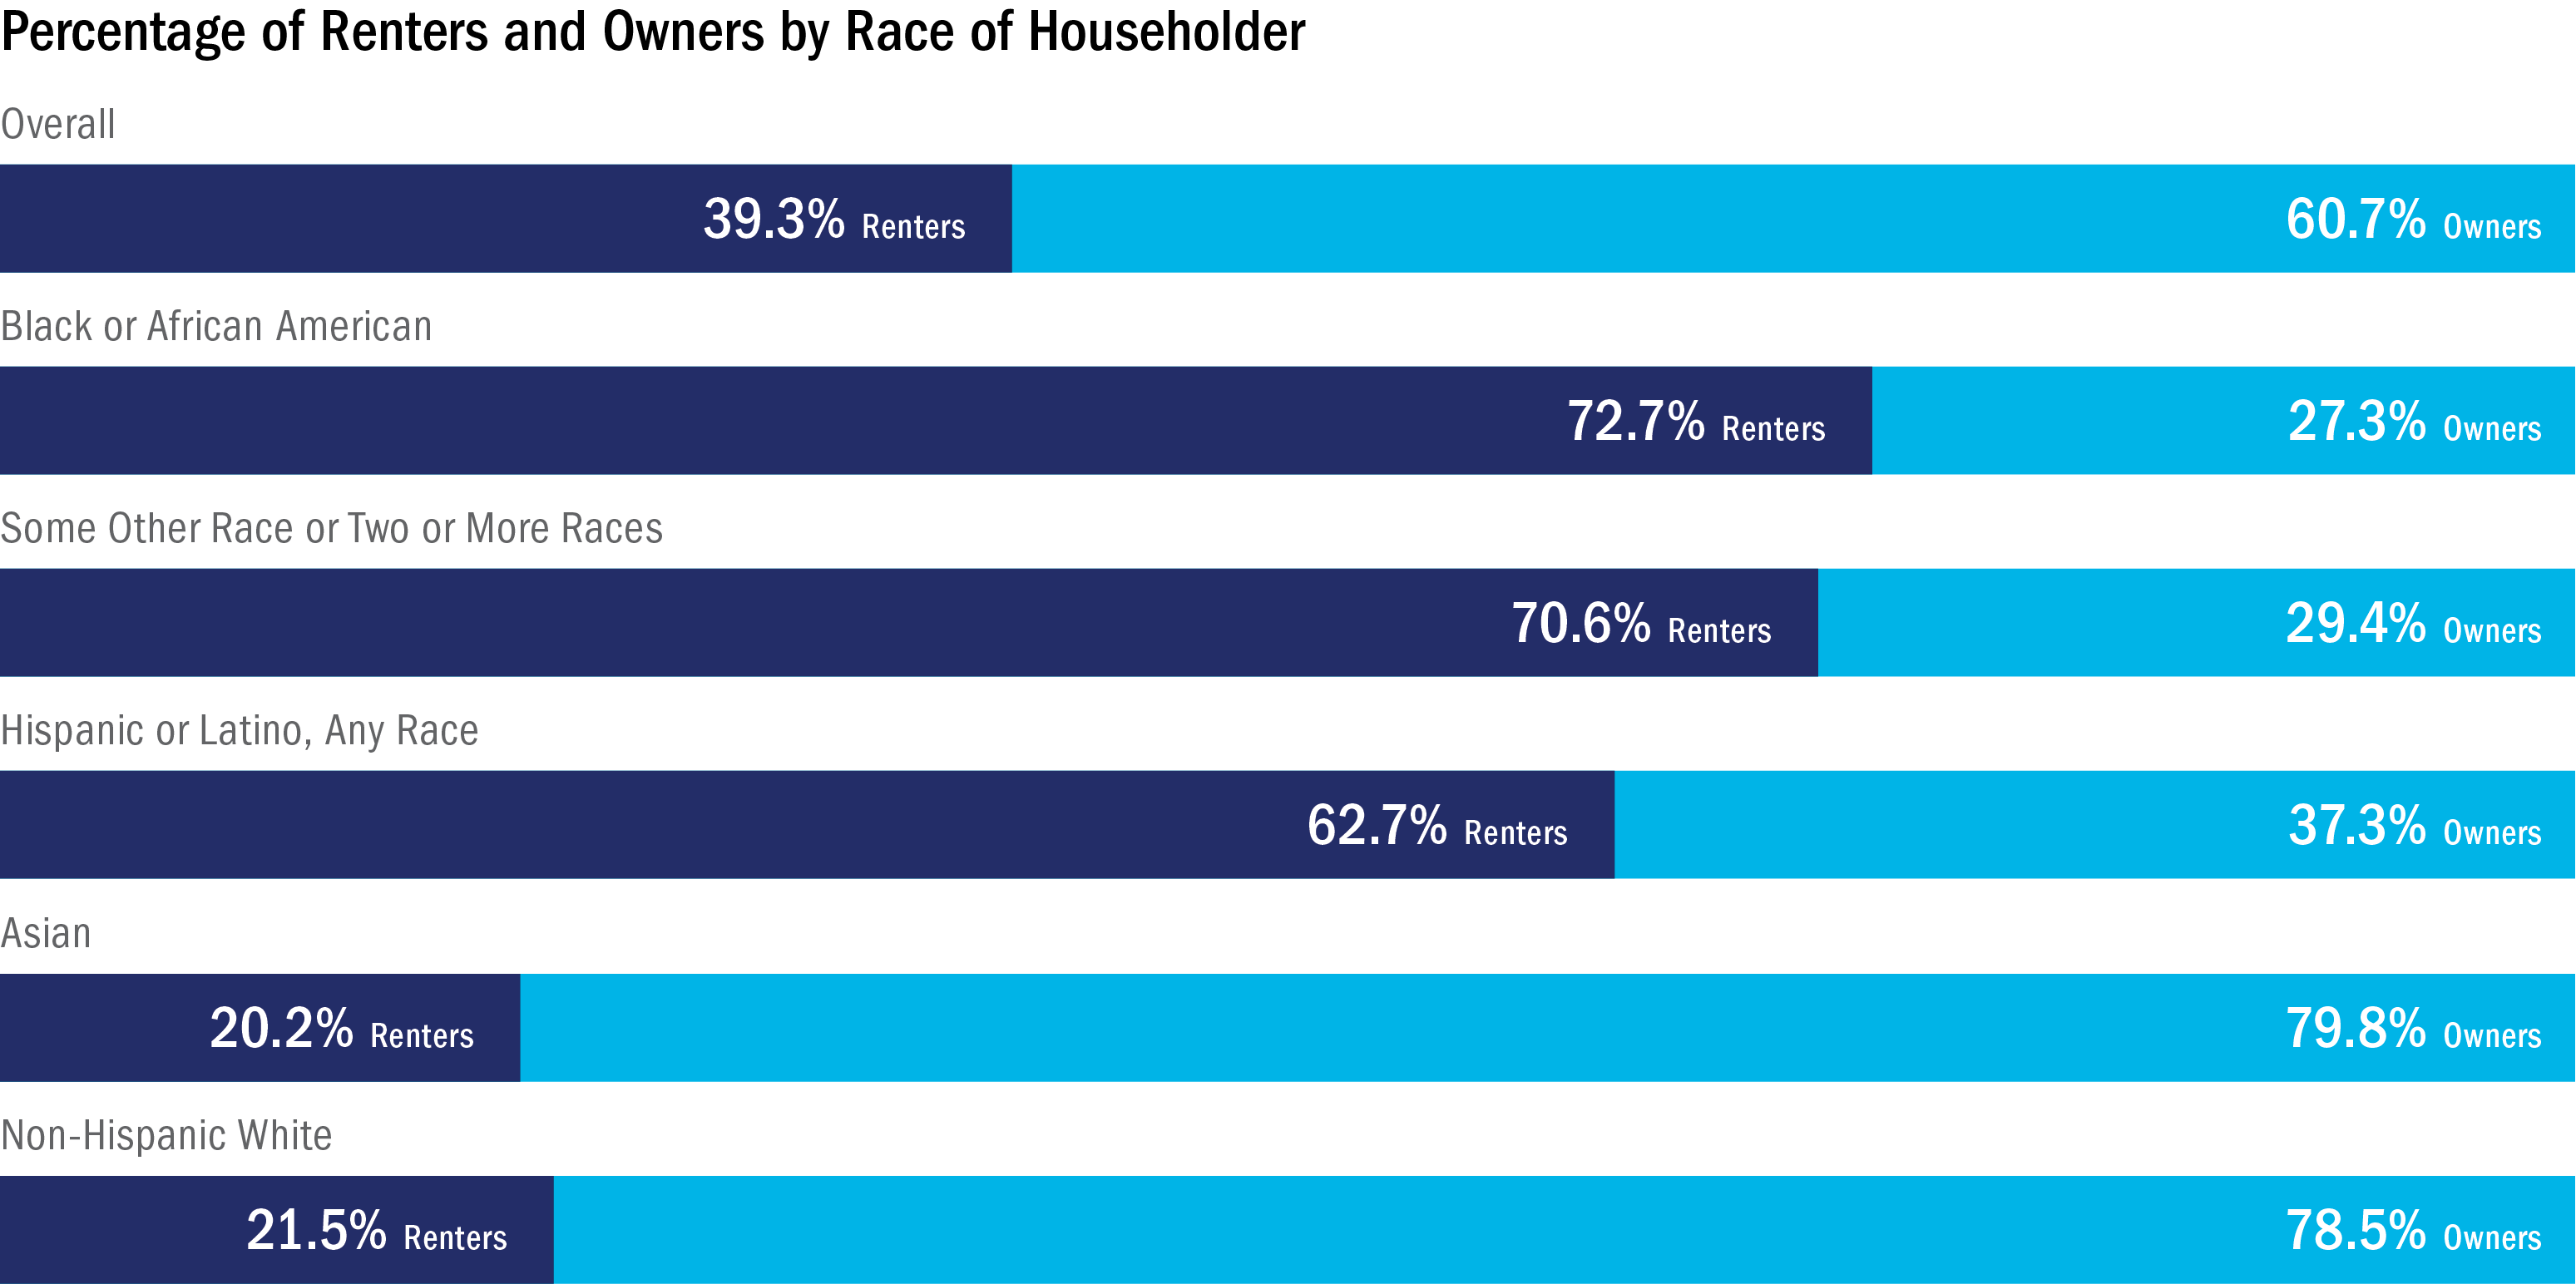 Figure 2. Percentage of Renters and Owners by Race of Householder